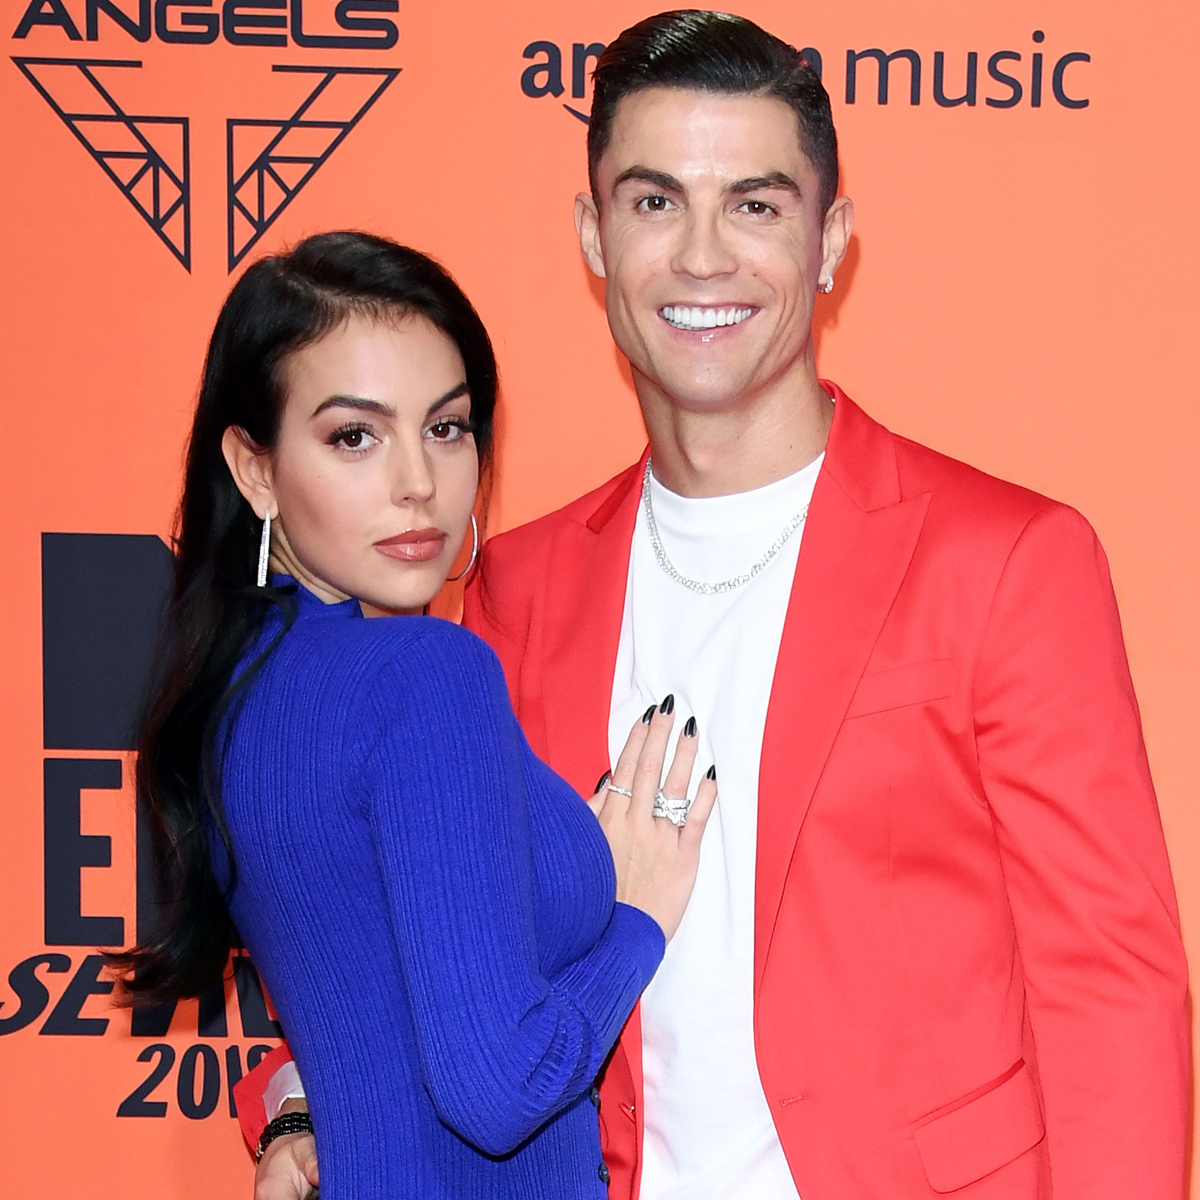 Georgina Rodriguez, like never before/ CR7's partner shows her skills as a  real fighter in the ring (Video) - Gossip